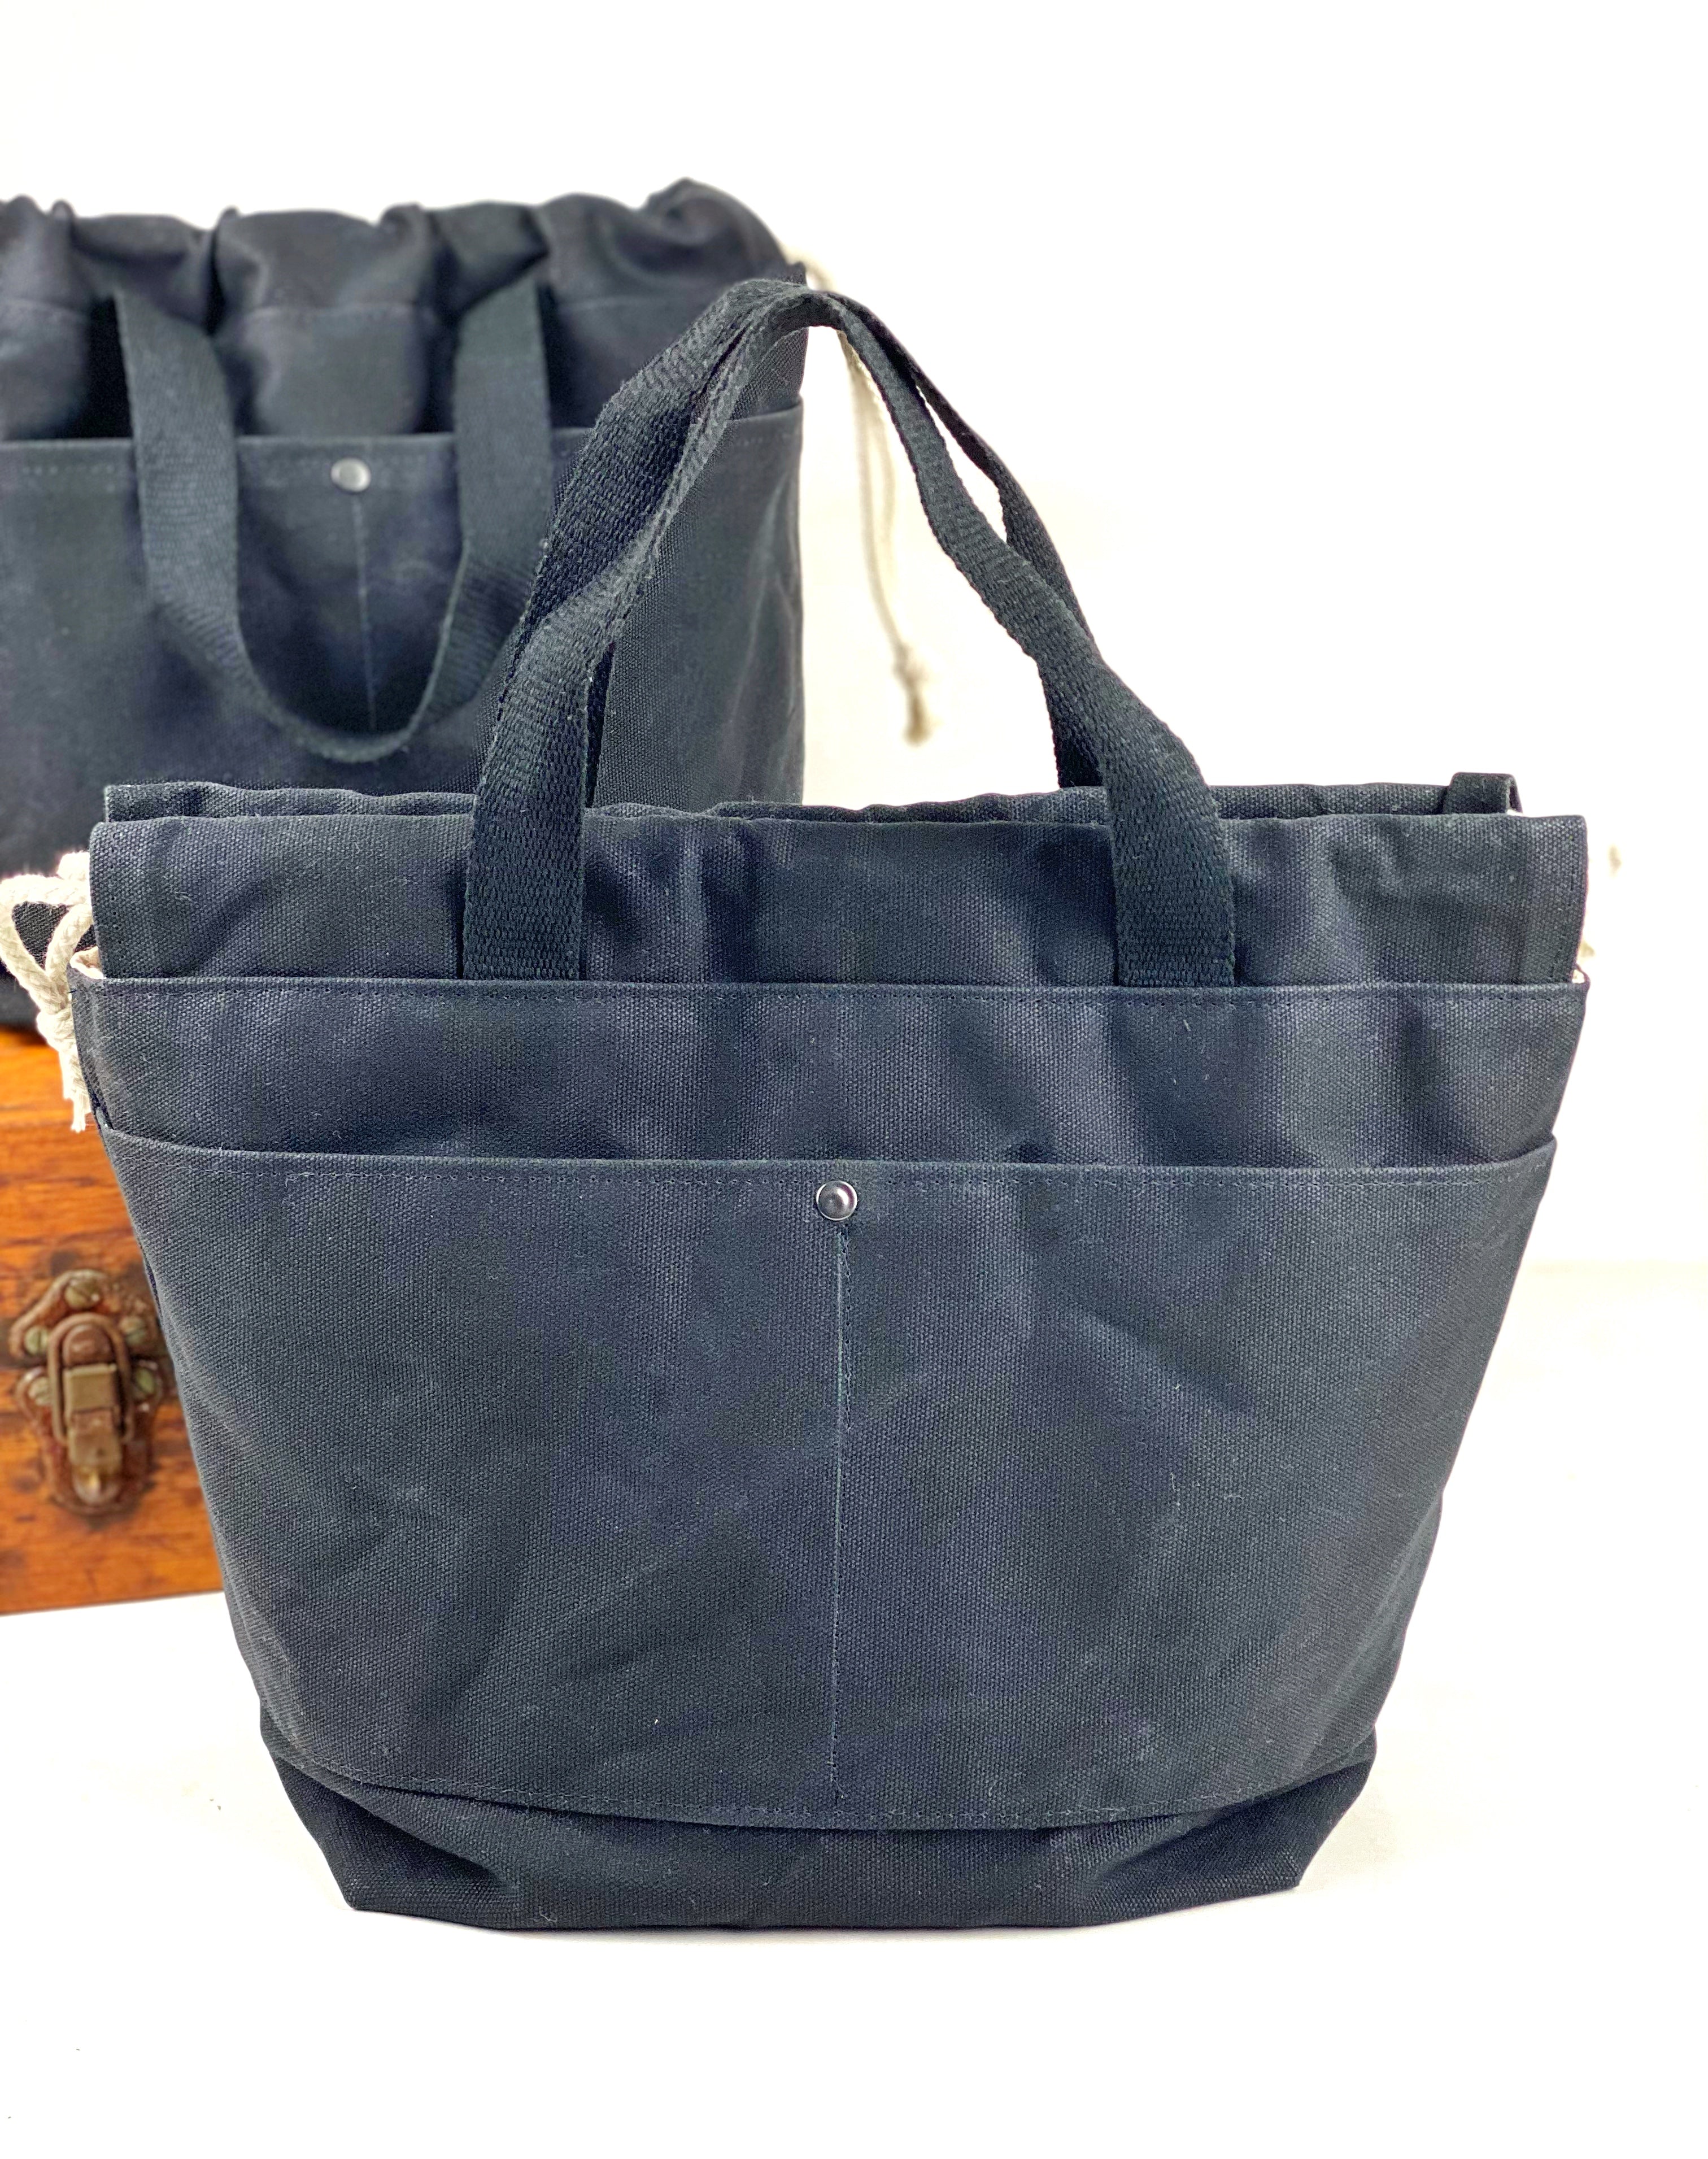 Solid Color Waxed Canvas Project Bag Knit or Crochet Drawstring Tote ...